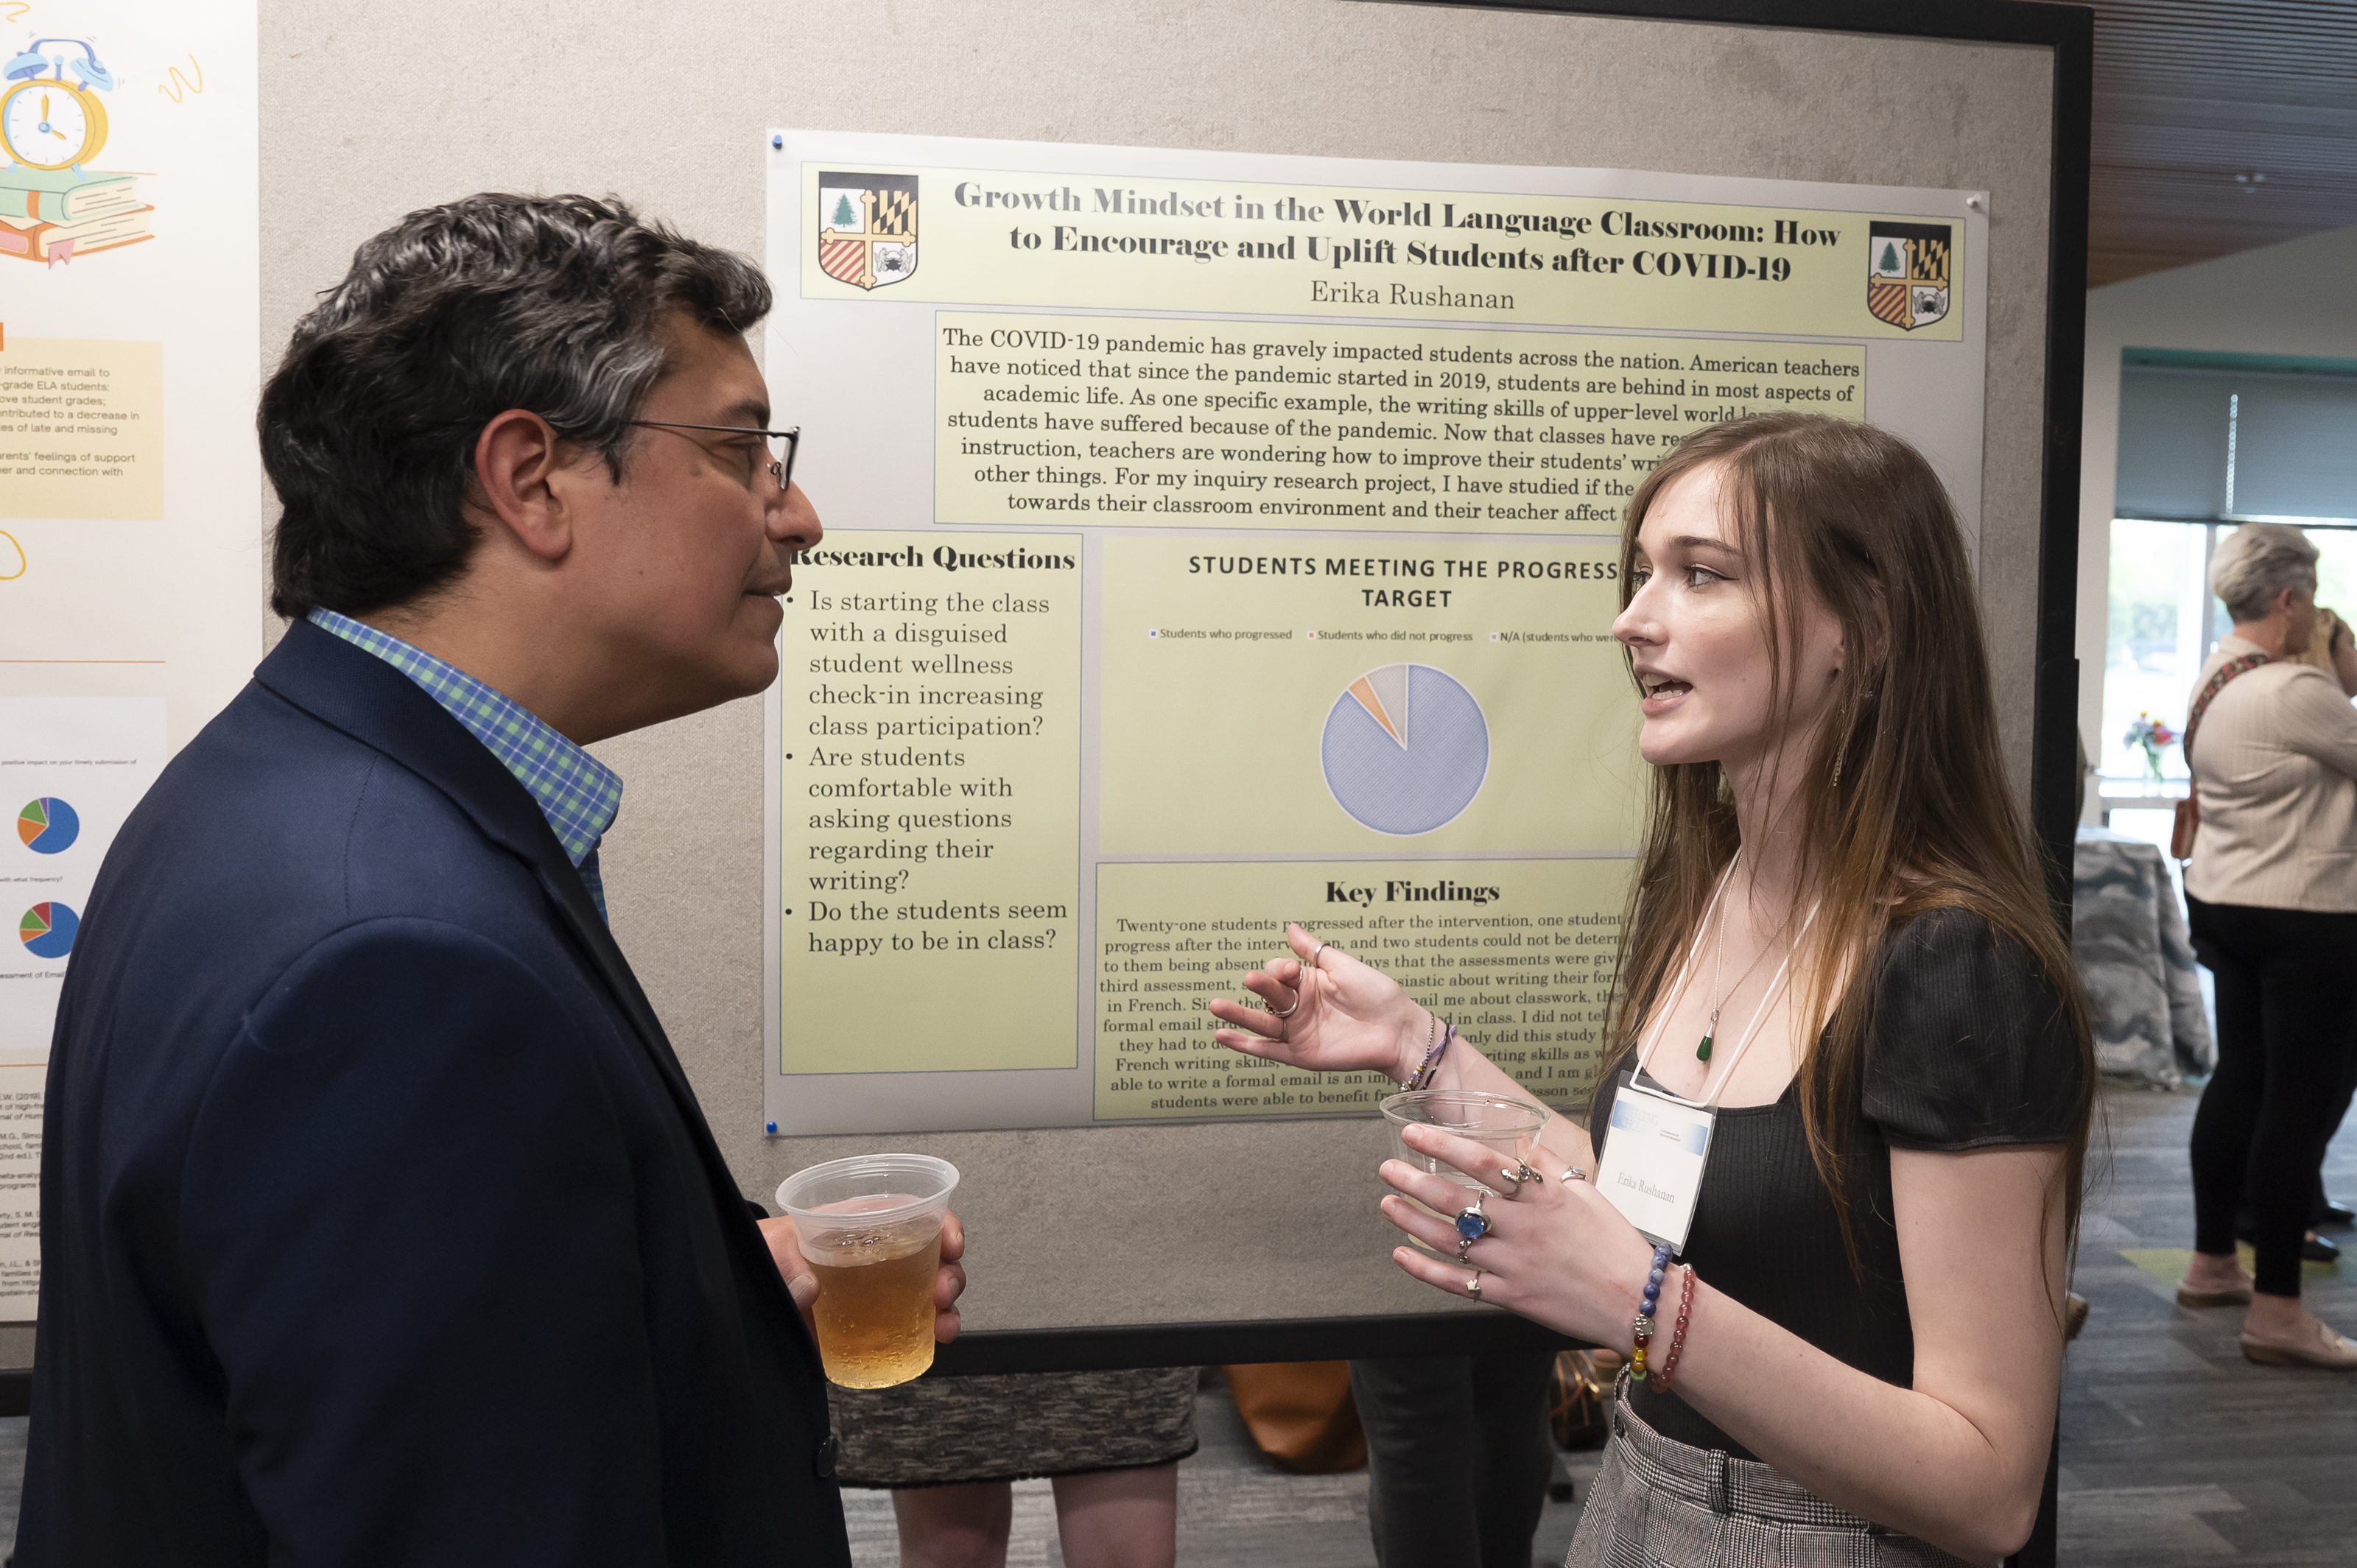 Presenter discusses poster with administrator at Emerging Scholars Loyola University Maryland